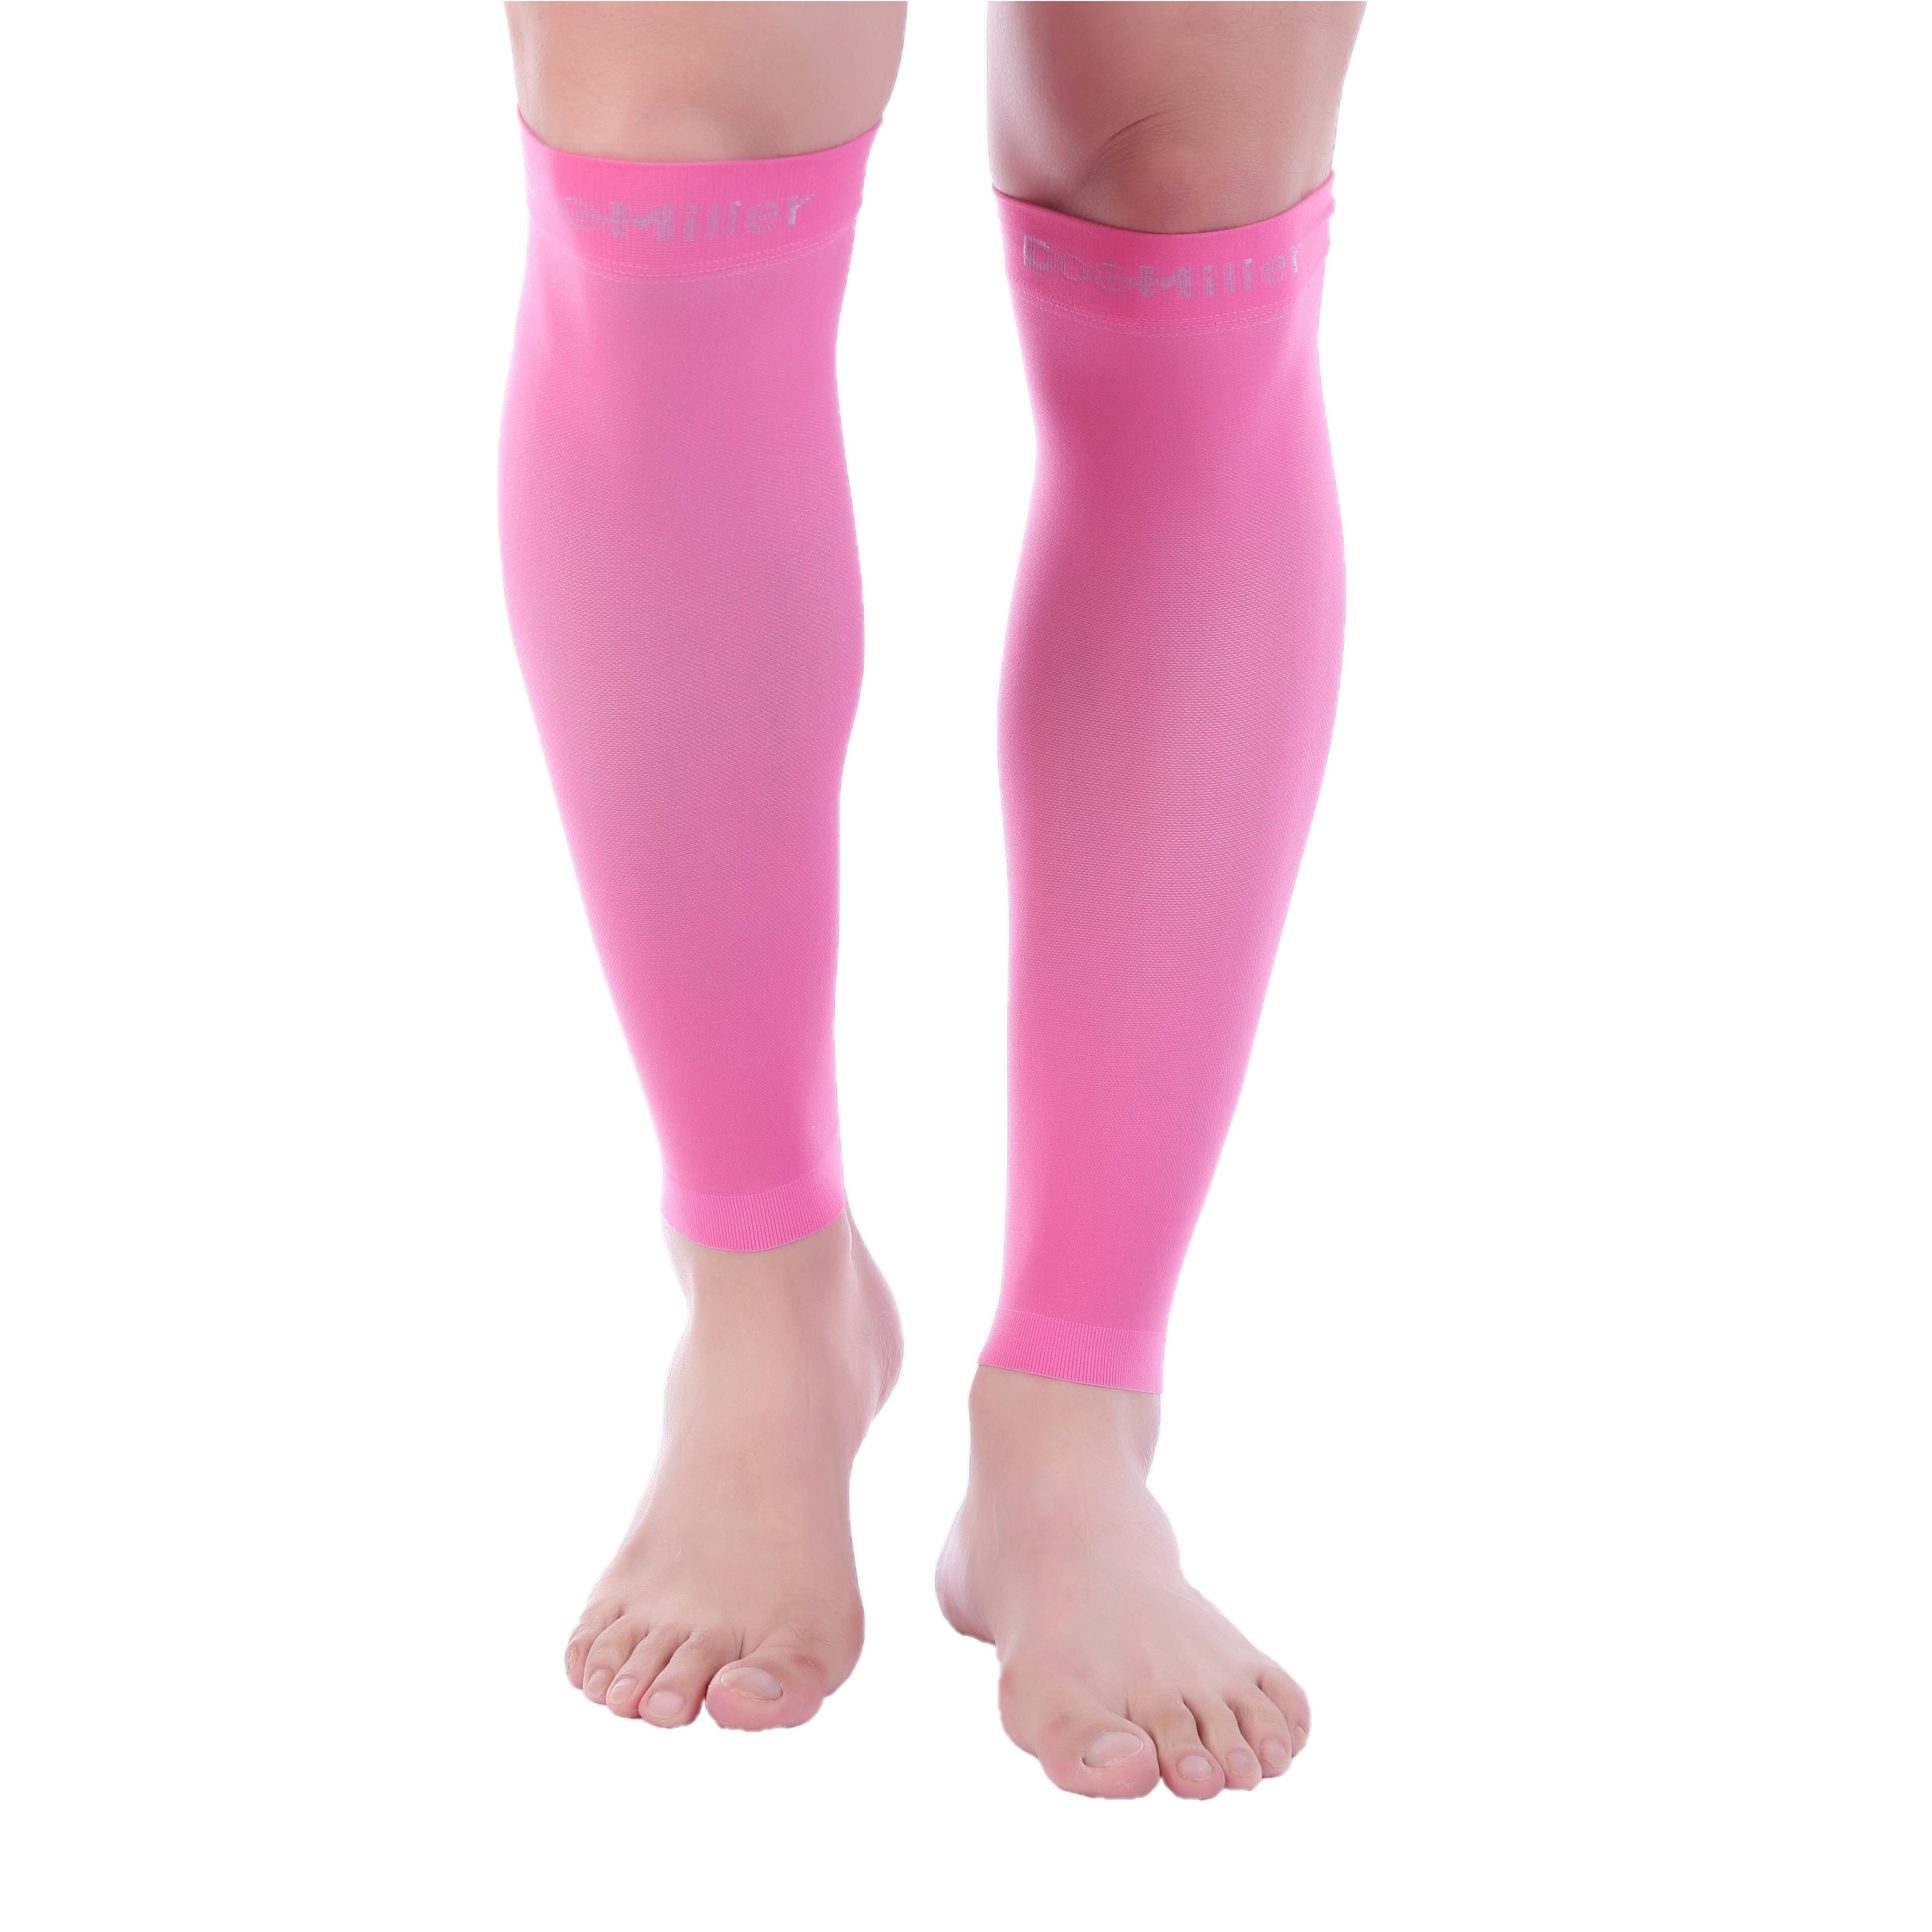 Premium Calf Compression Sleeve 20-30 mmHg PINK by Doc Miller